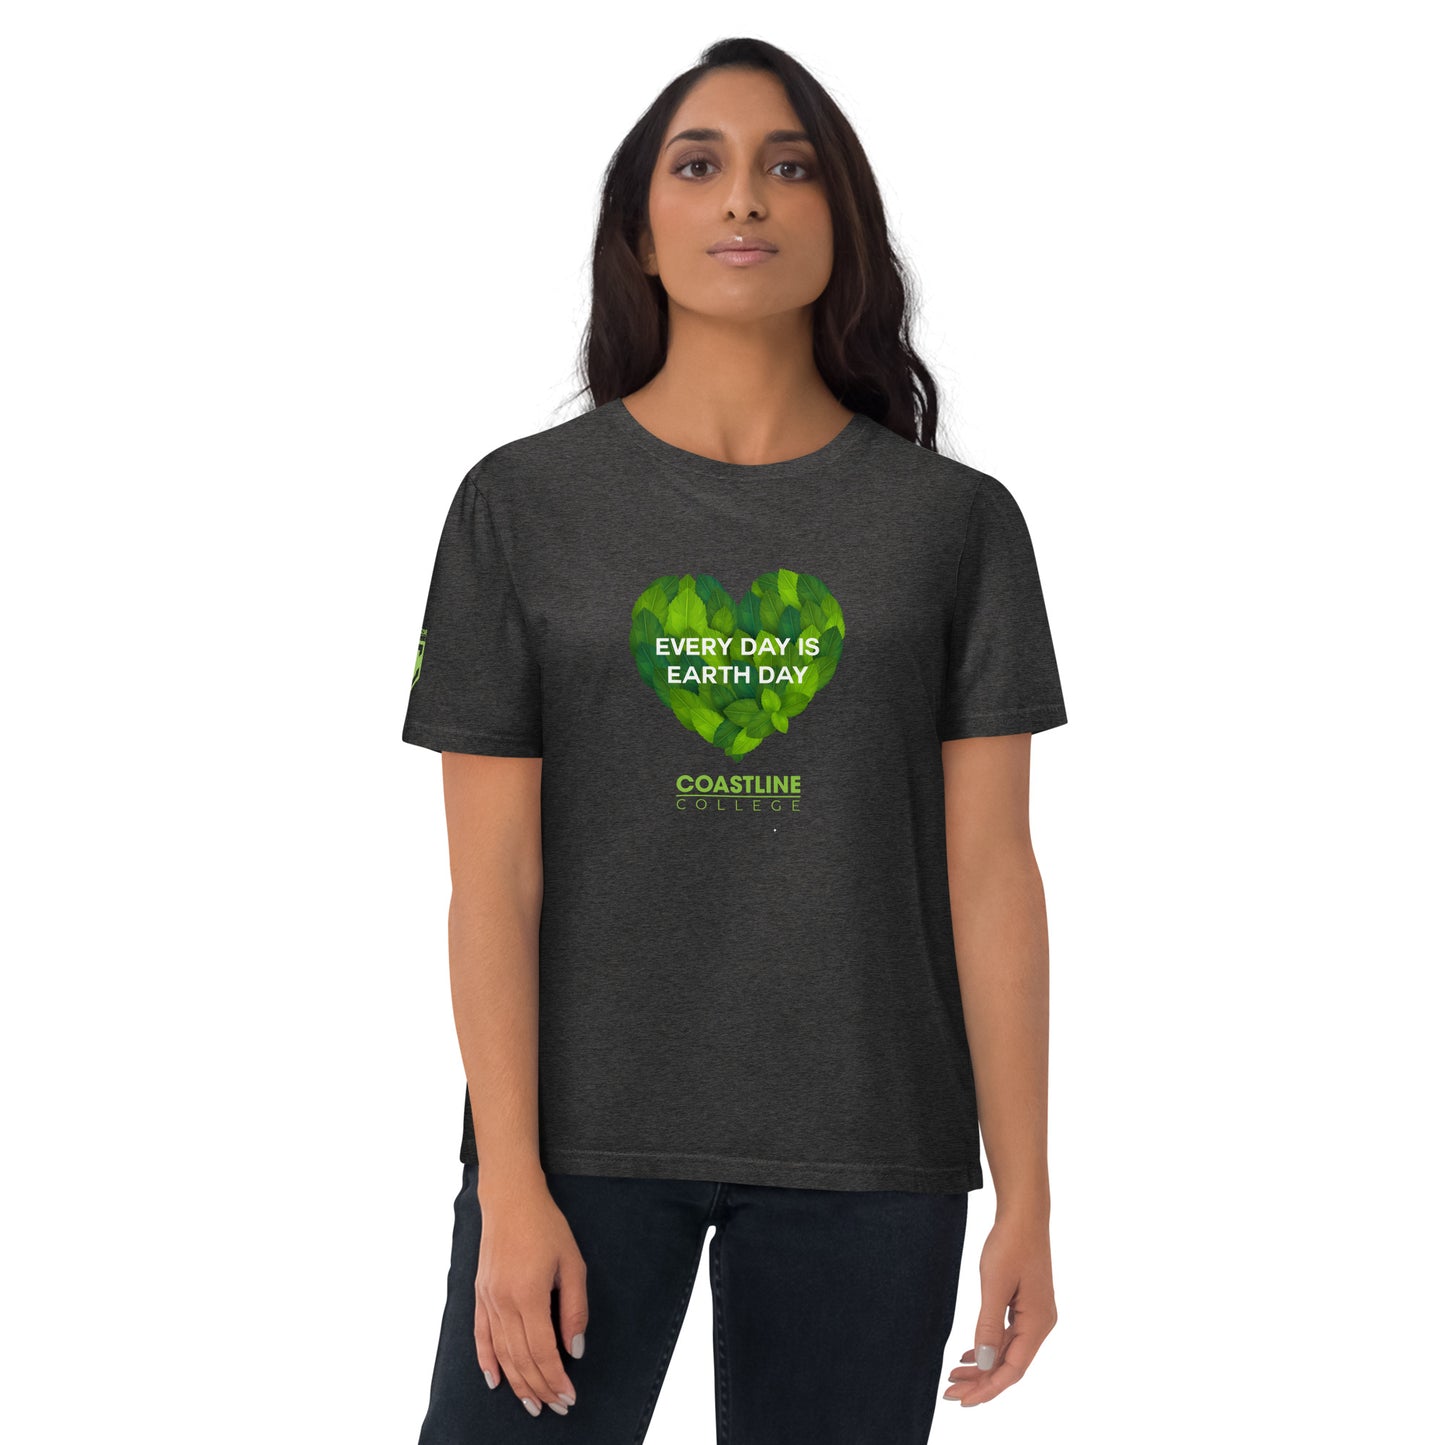 Coastline "Every Day is Earth Day" Unisex Organic Cotton T-Shirt - Dark Colors